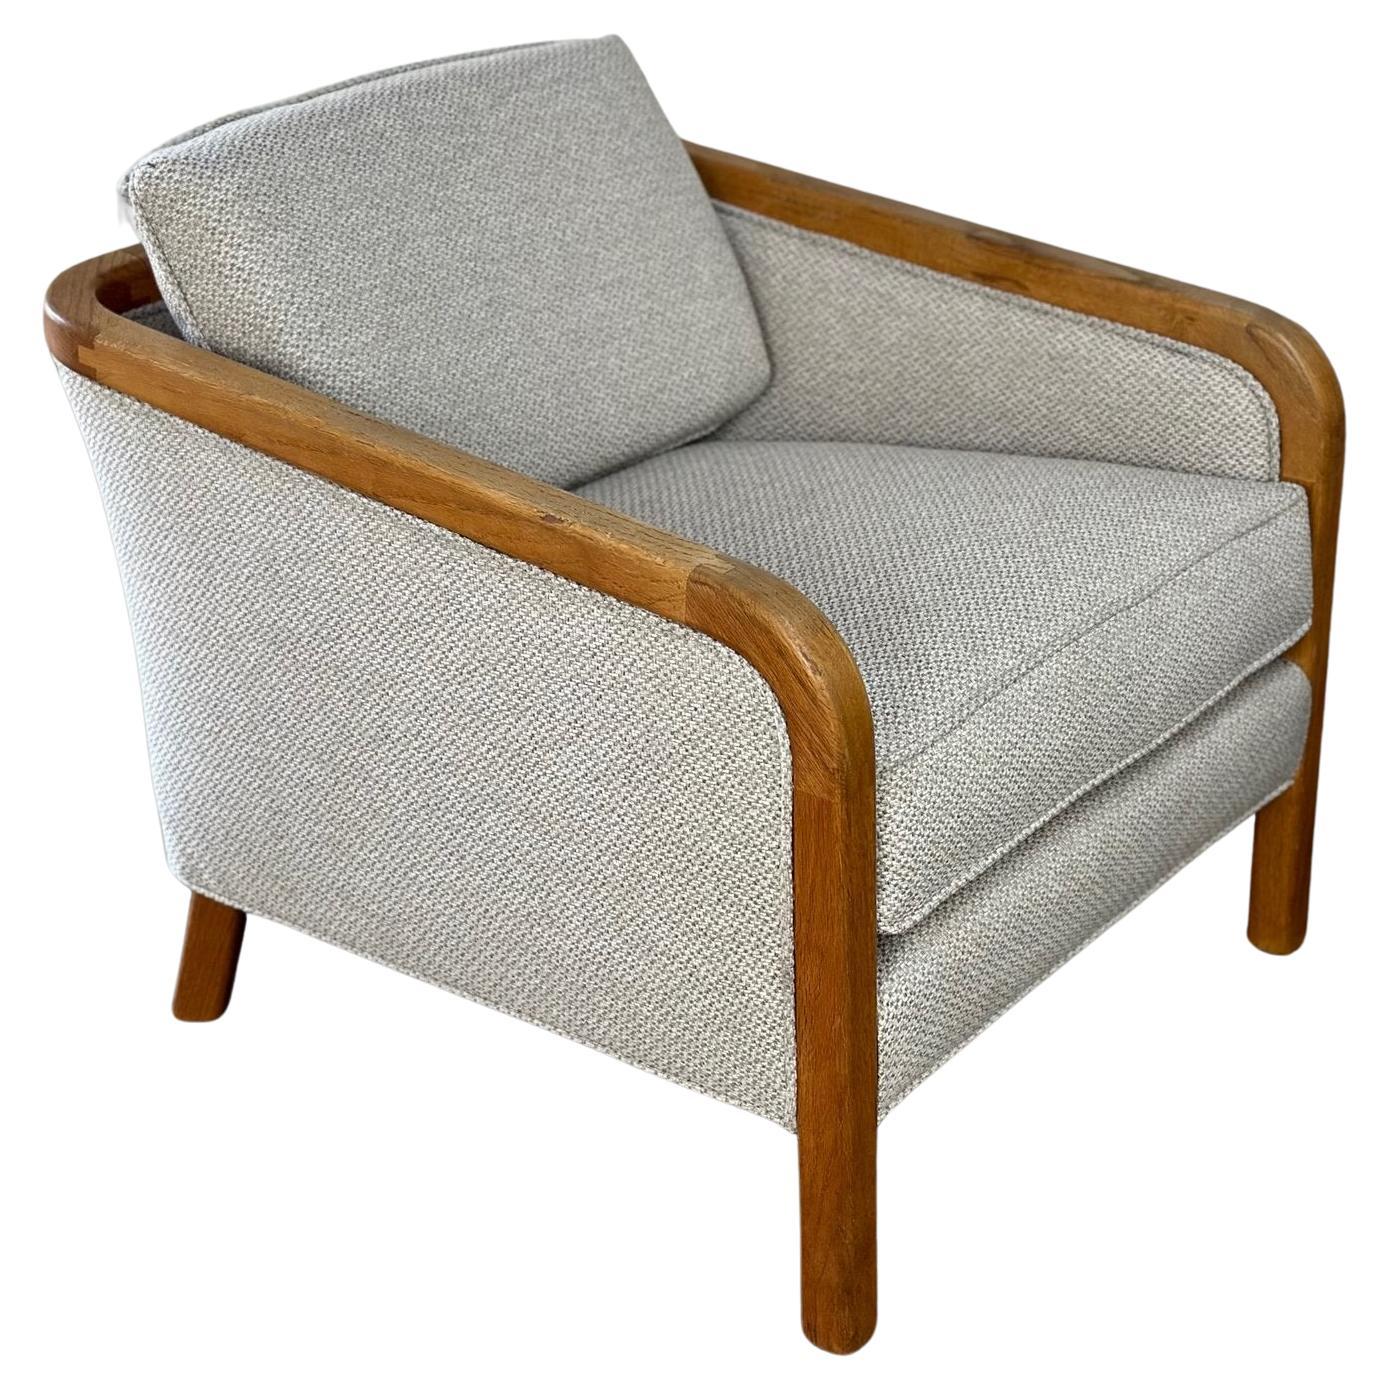 Mid century lounge chair with exposed joinery- Single Chair For Sale